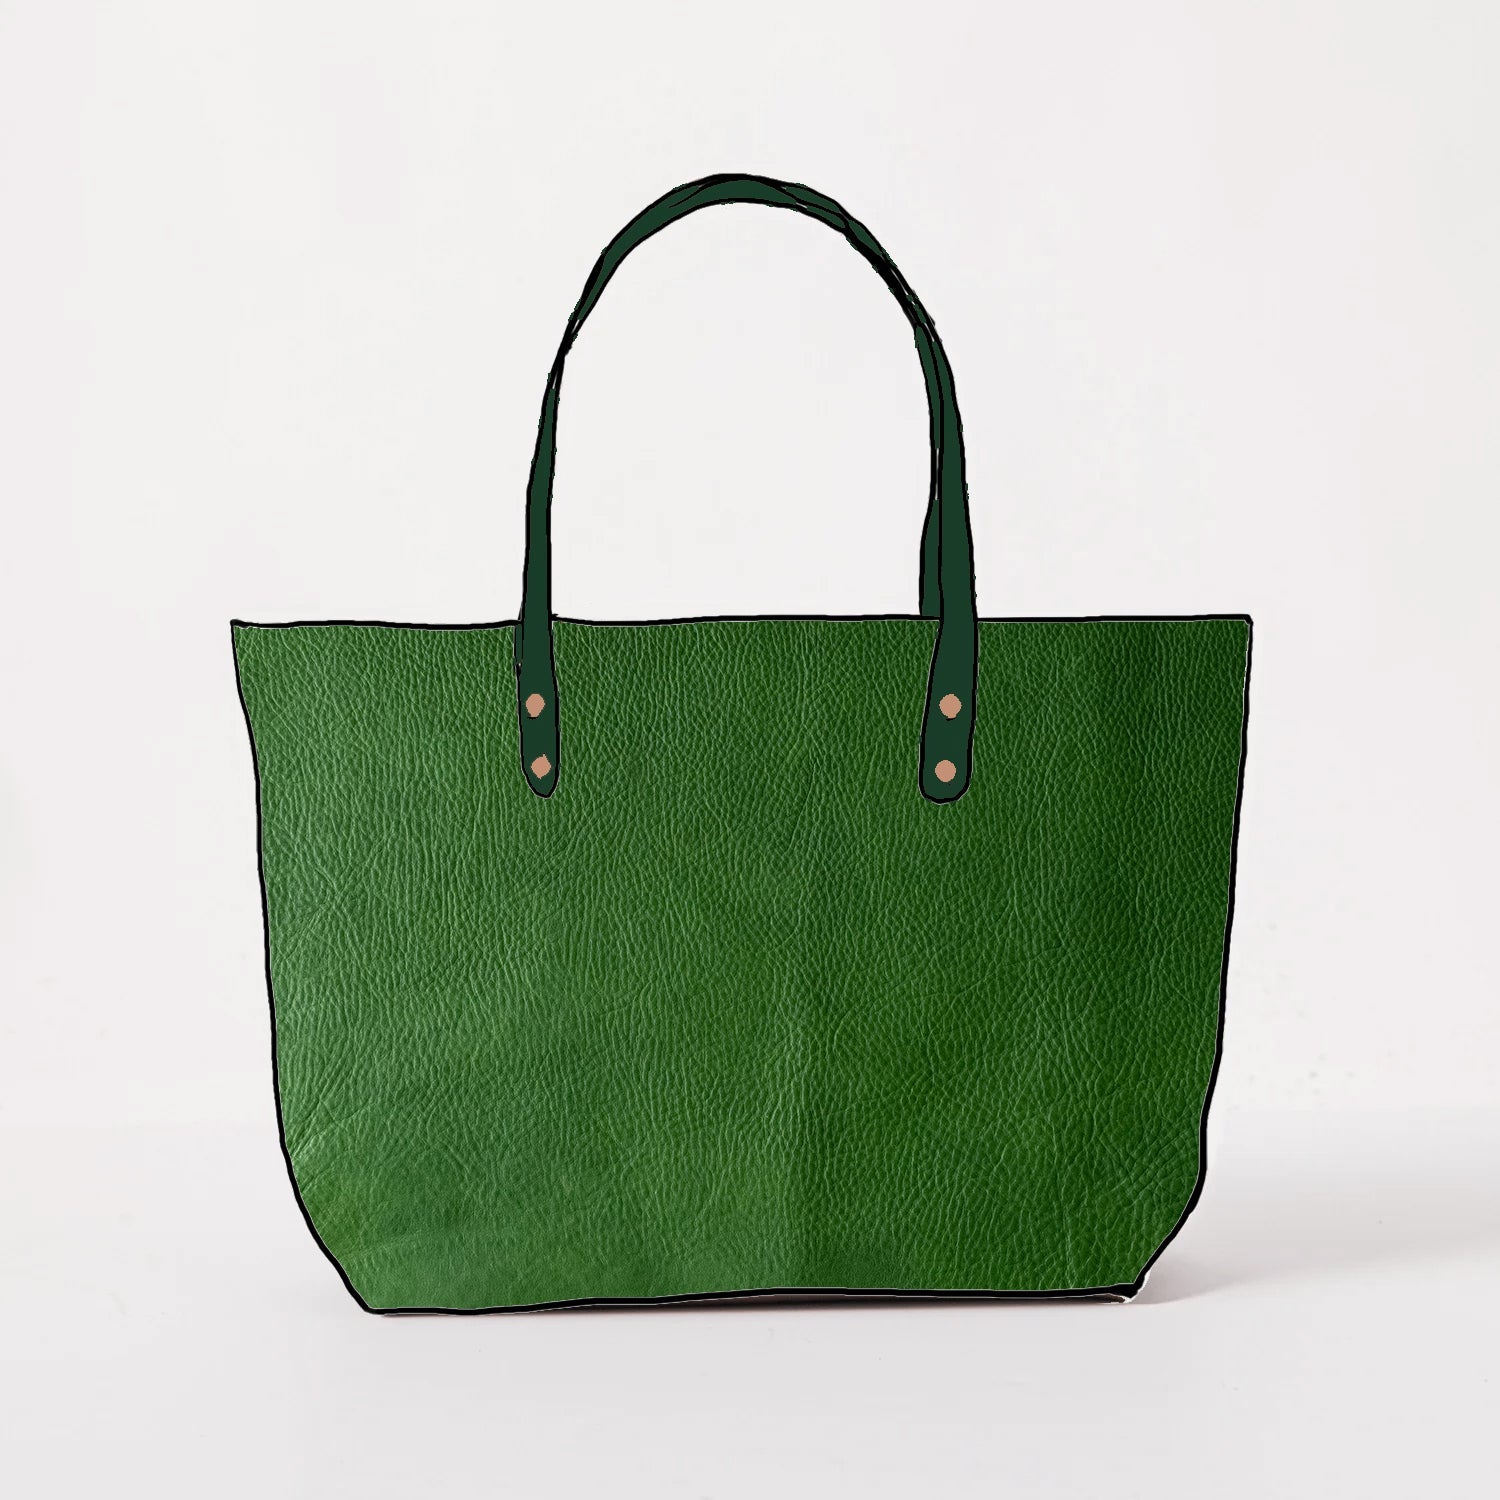 Leather Tote Bags: East West Tote | leather handbags by KMM & Co.